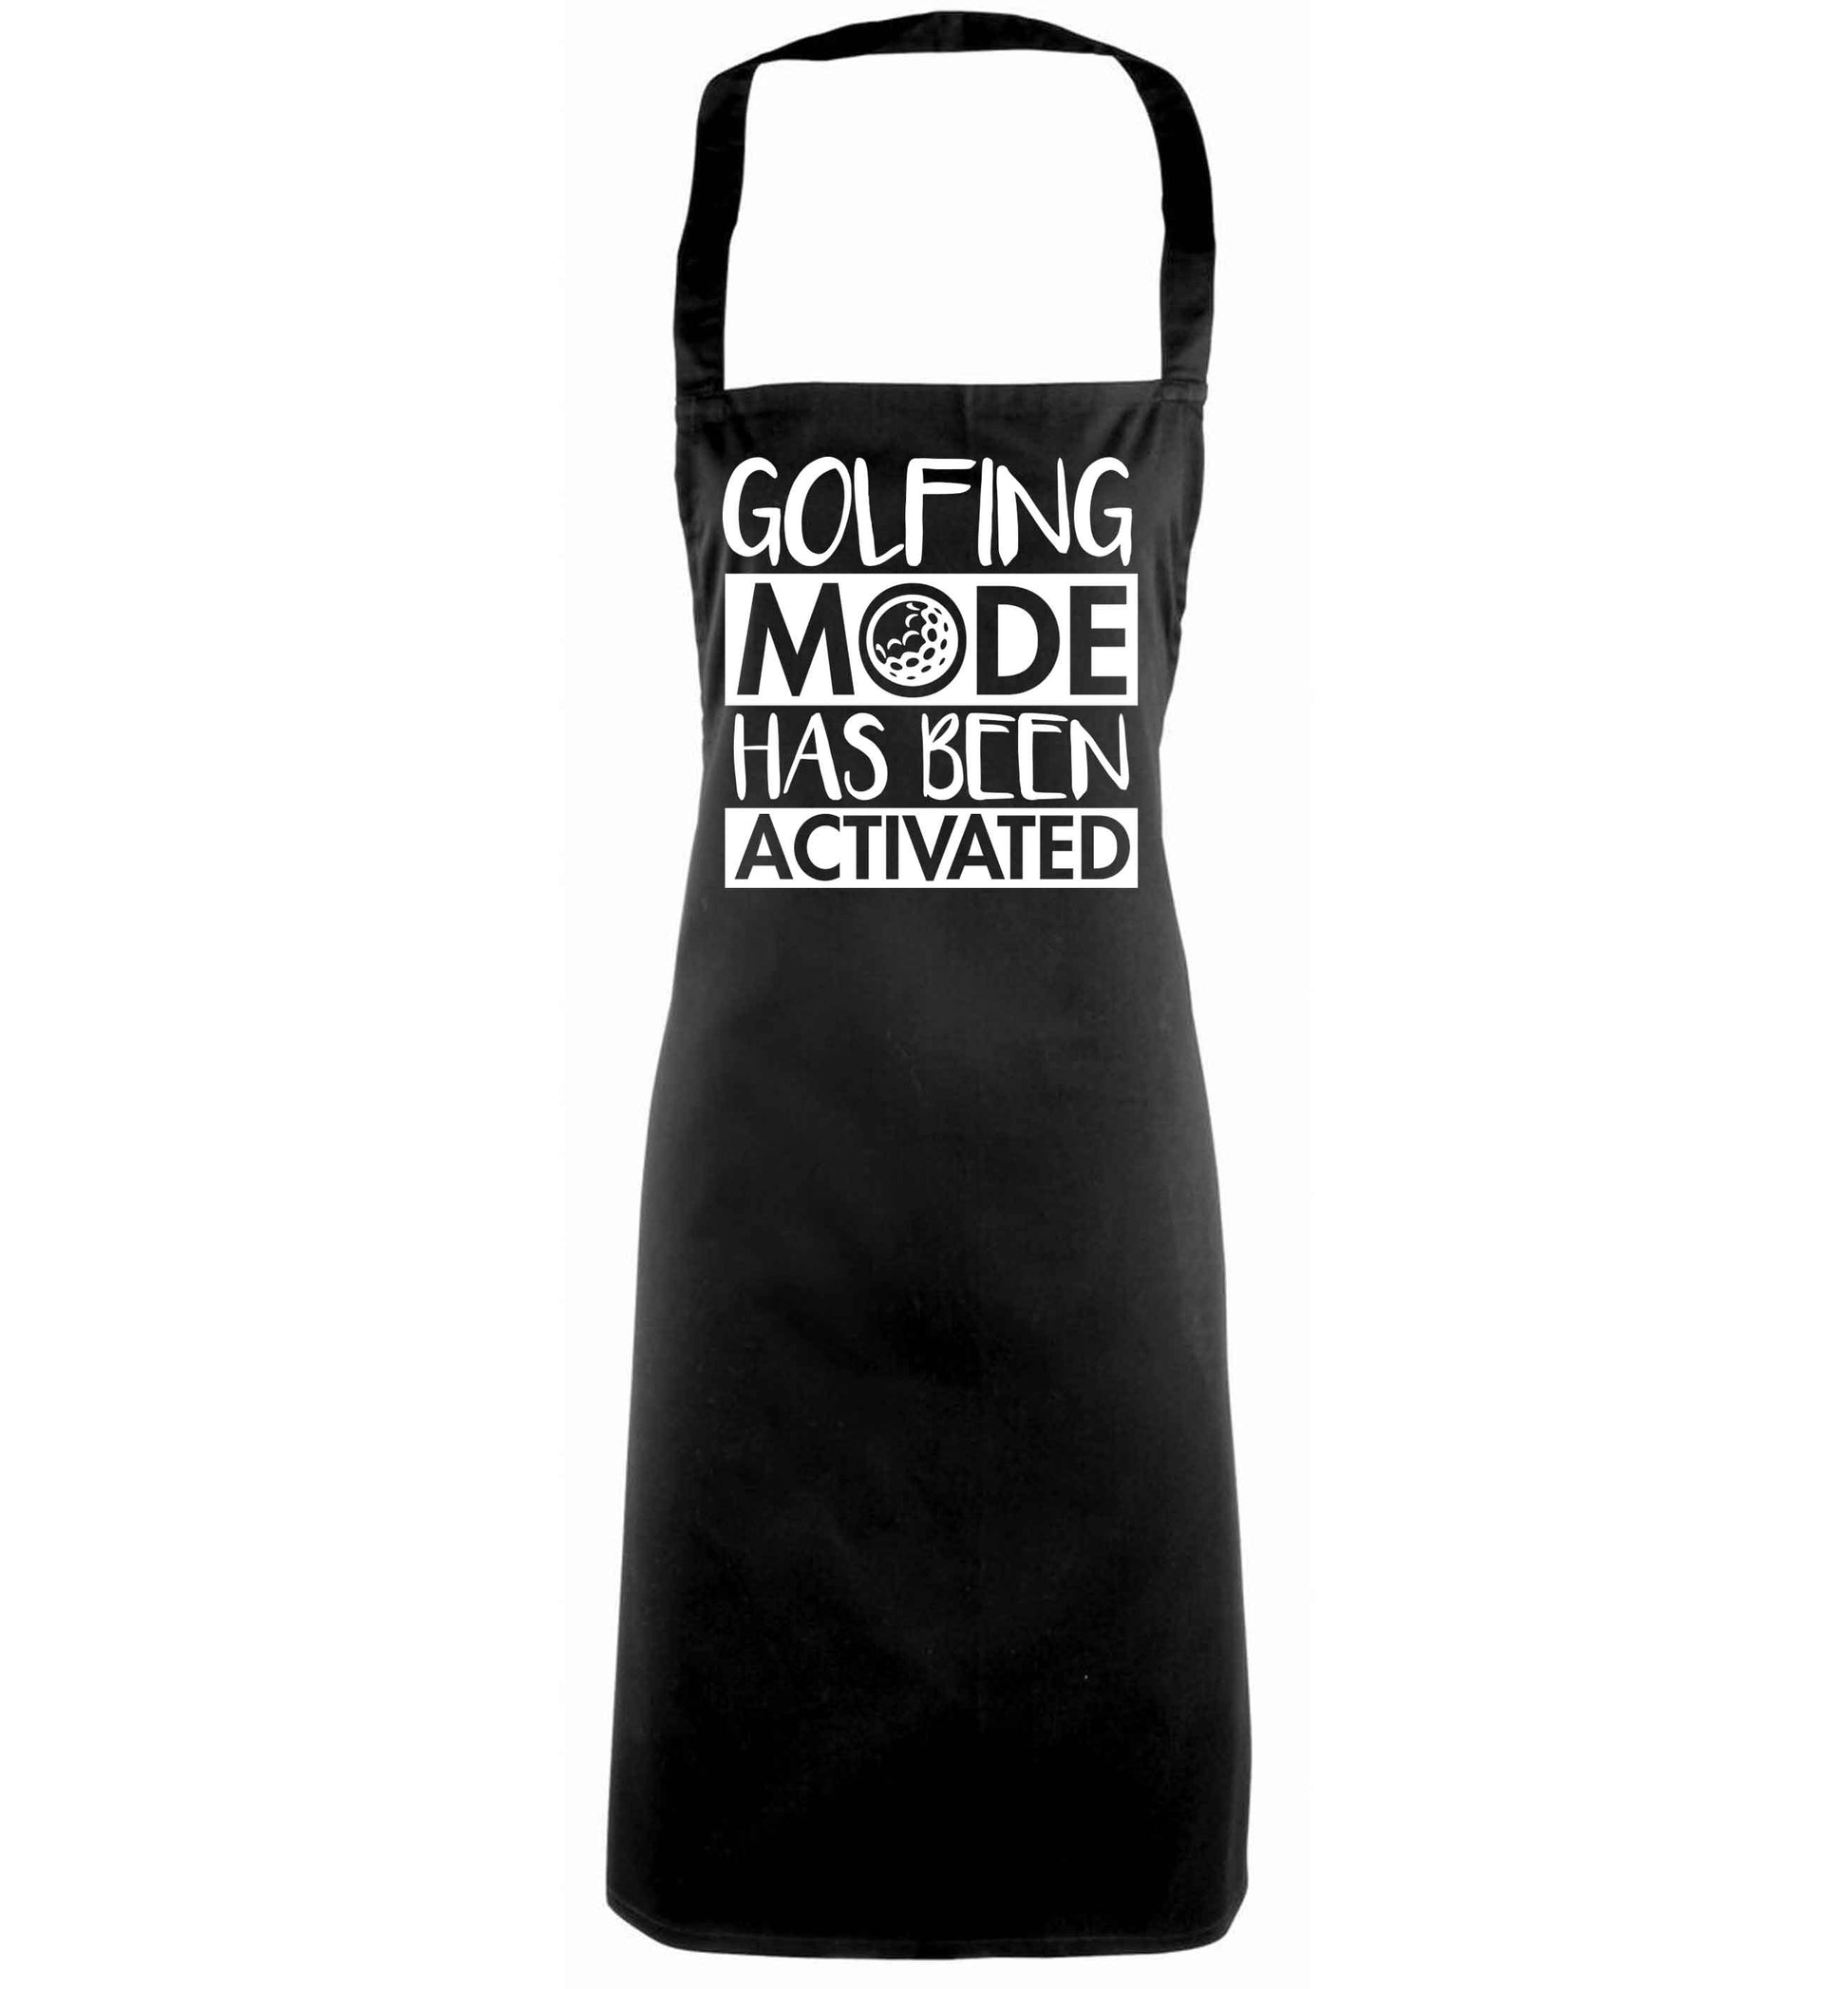 Golfing mode has been activated black apron